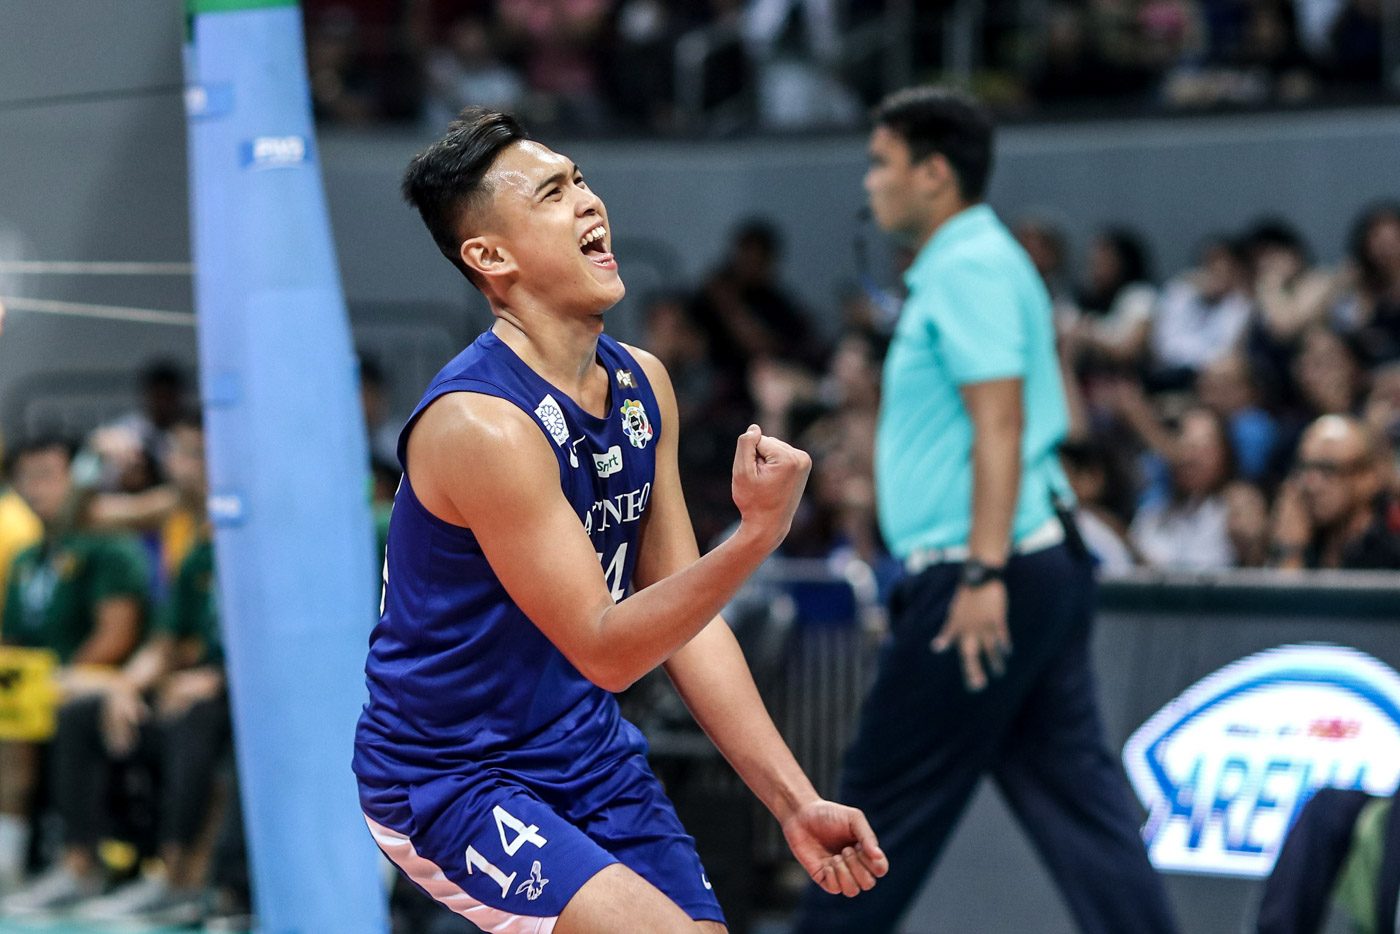 Ish Polvorosa’s playmaking propels Ateneo to the Finals in his last year